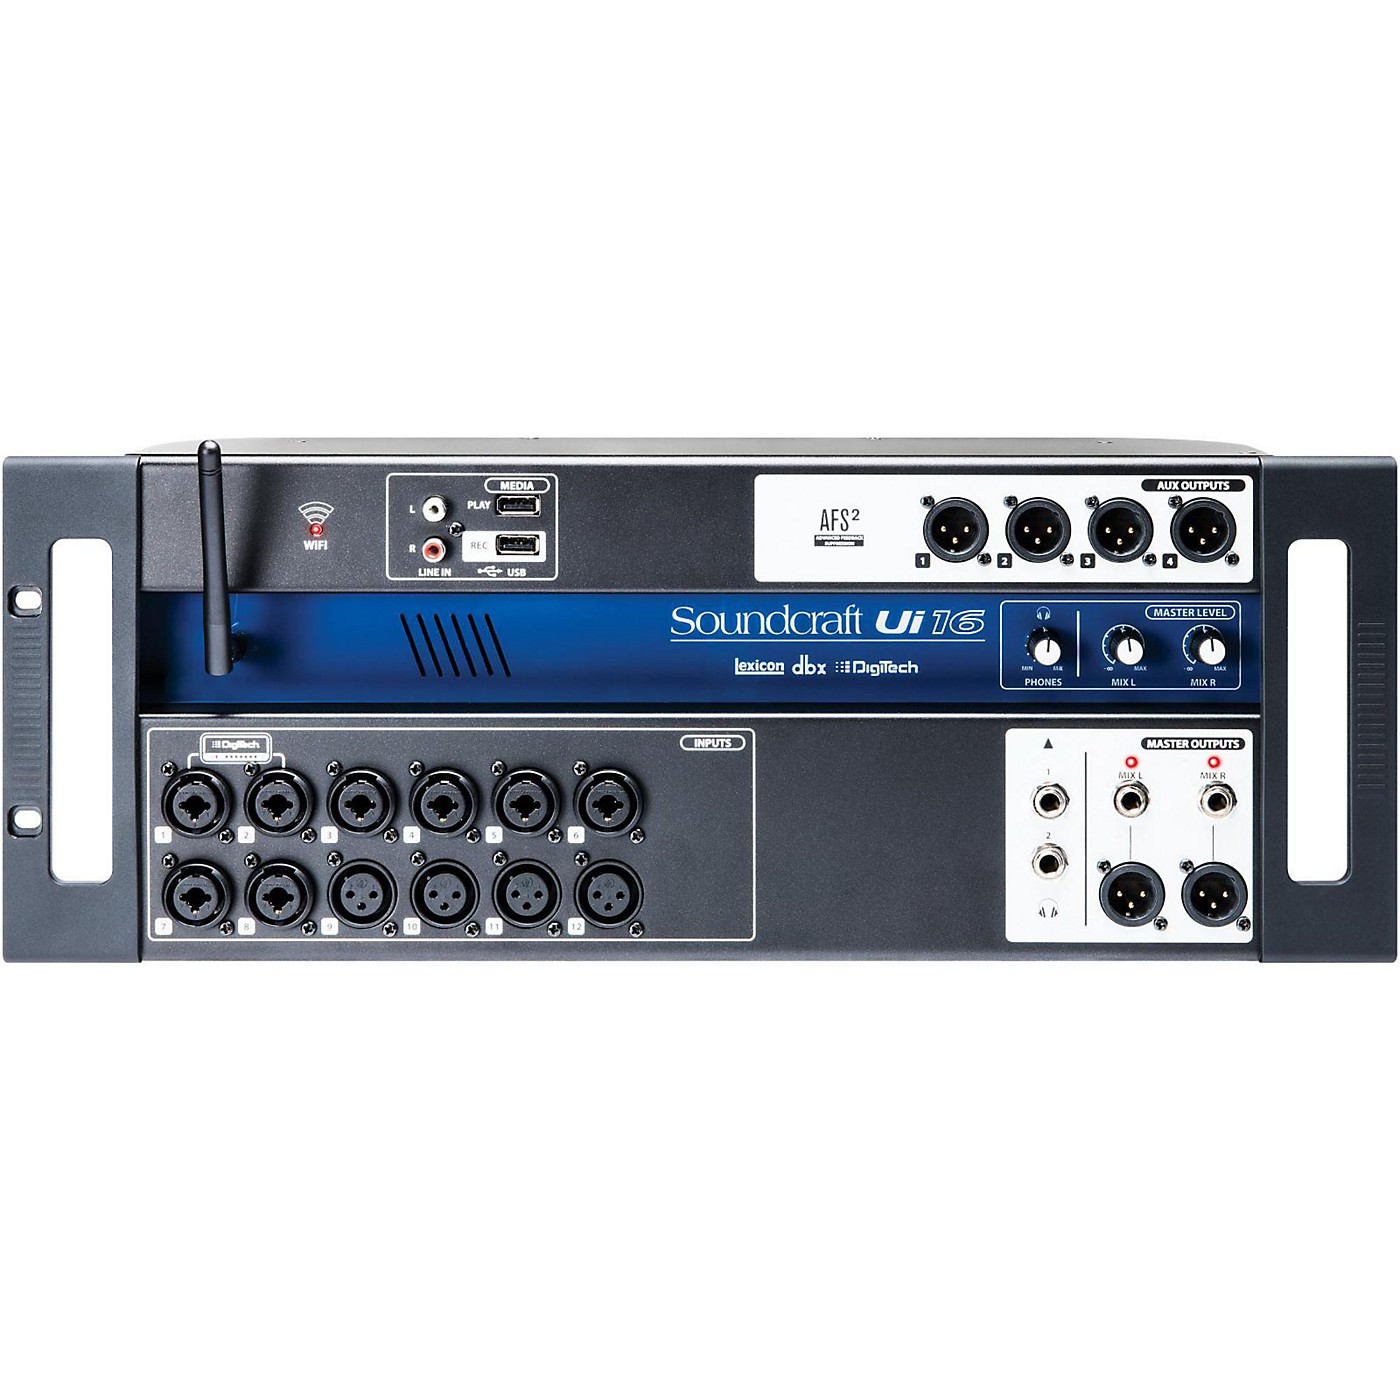 Soundcraft Ui16 Digital Mixer with Wi-Fi Router thumbnail